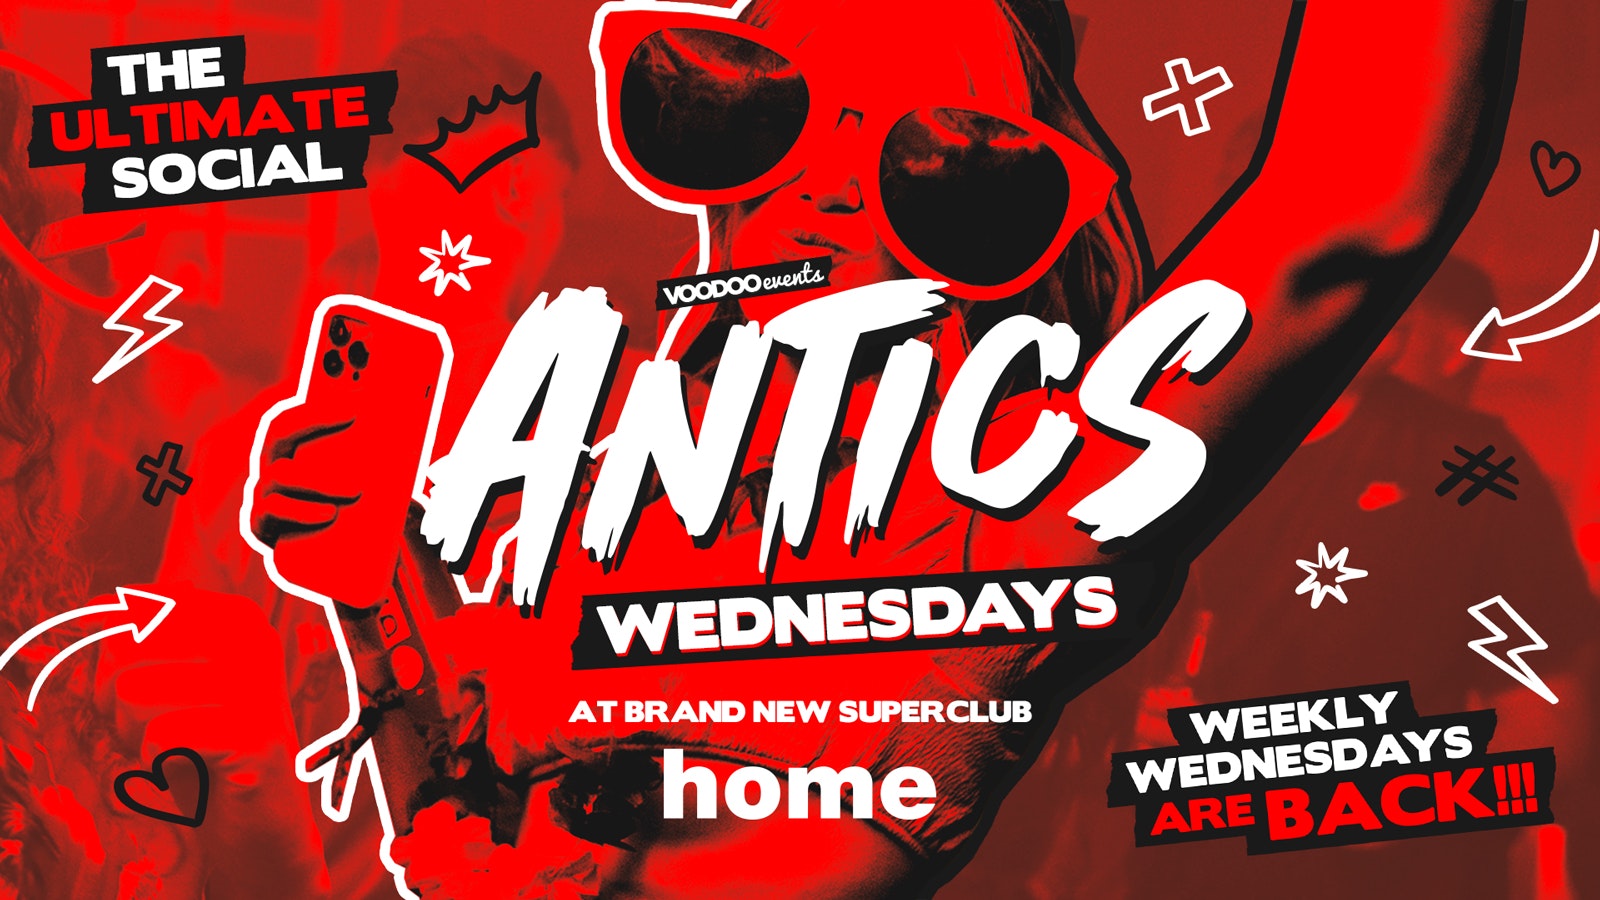 Antics @ THE BRAND NEW SUPER CLUB HOME – Wednesday 24th July